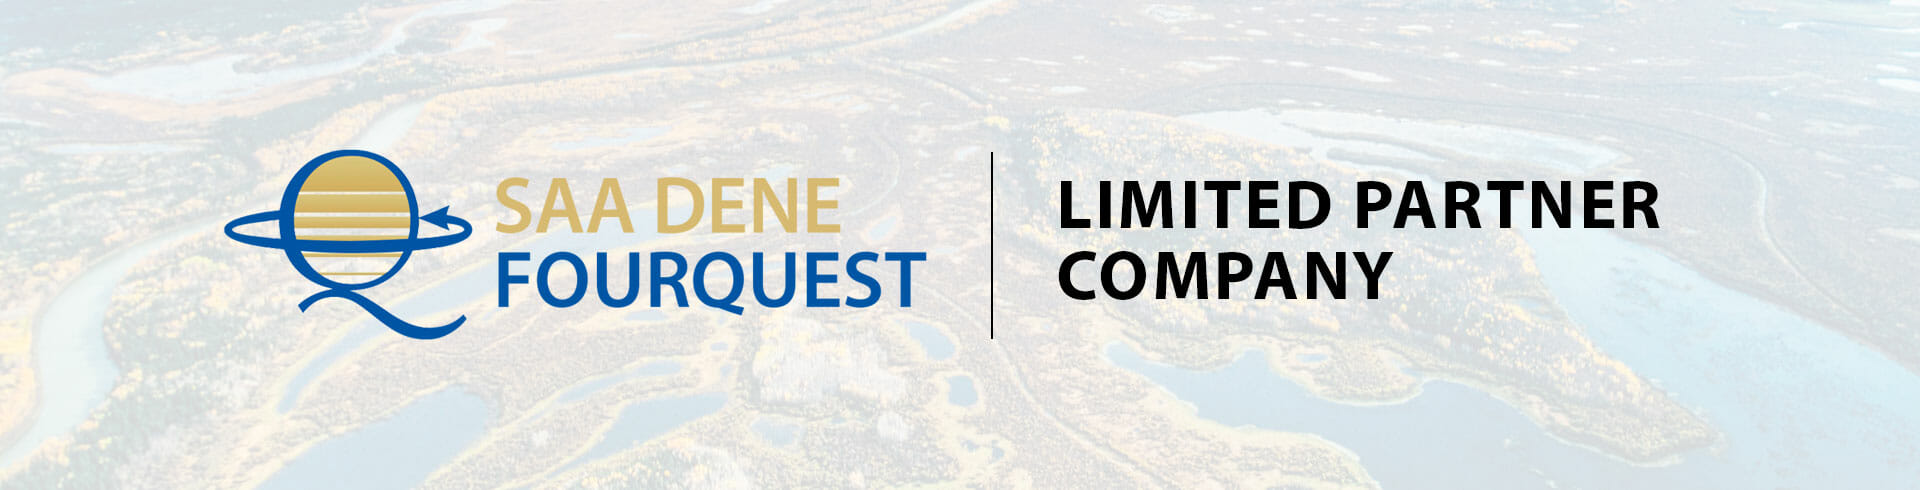 FourQuest Energy and Saa Dene create a limited partner company to support responsible energy development services throughout Canada.